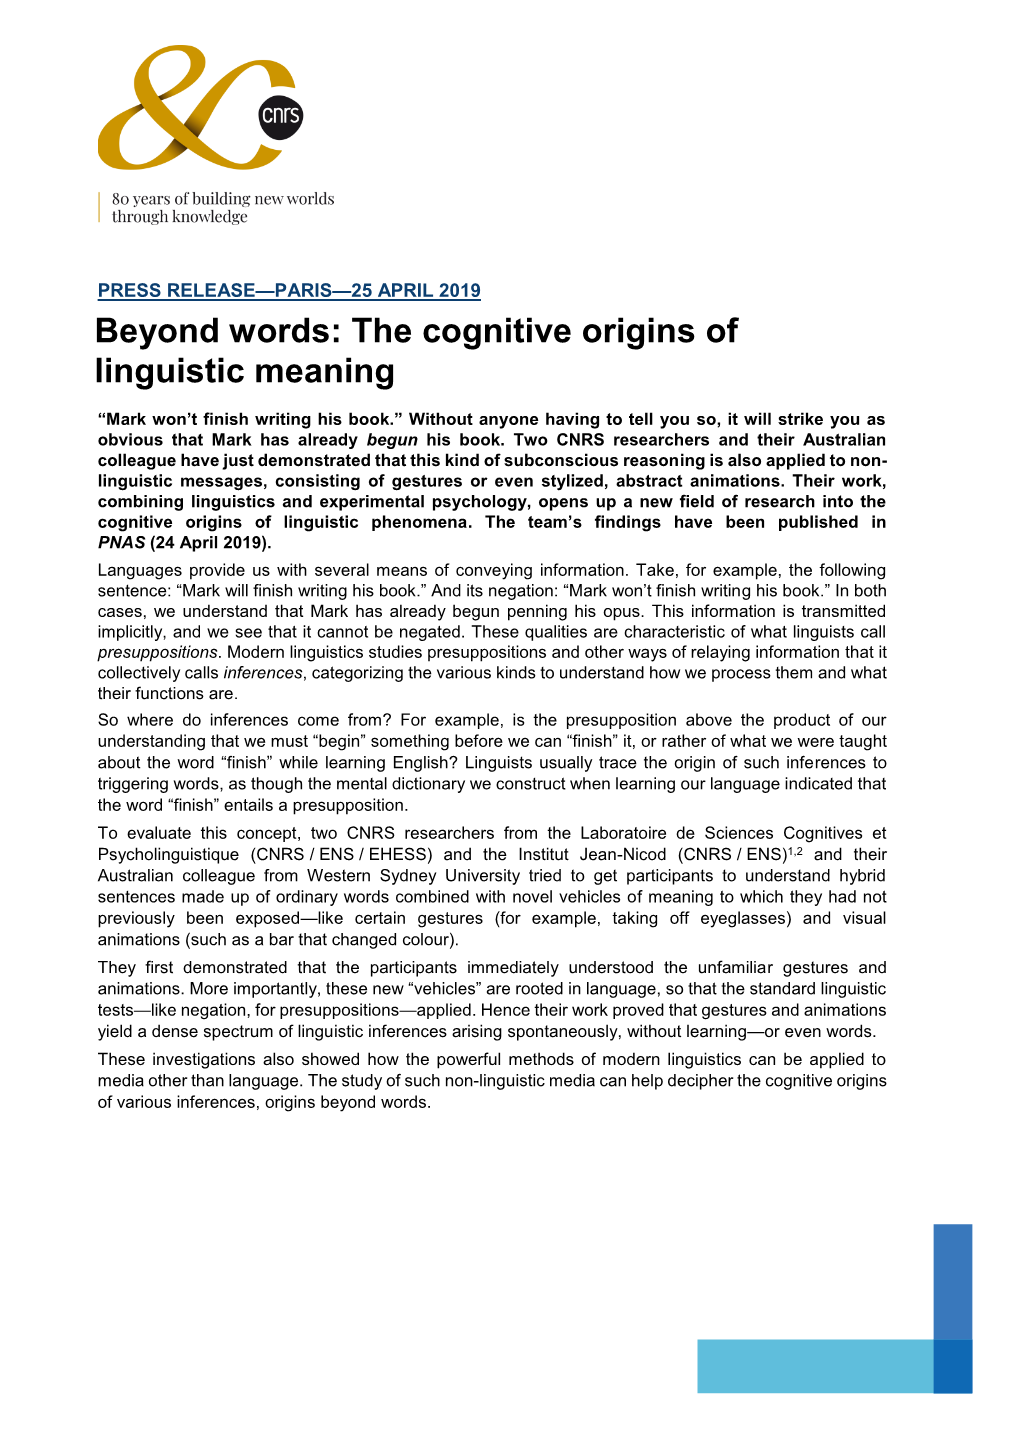 The Cognitive Origins of Linguistic Meaning